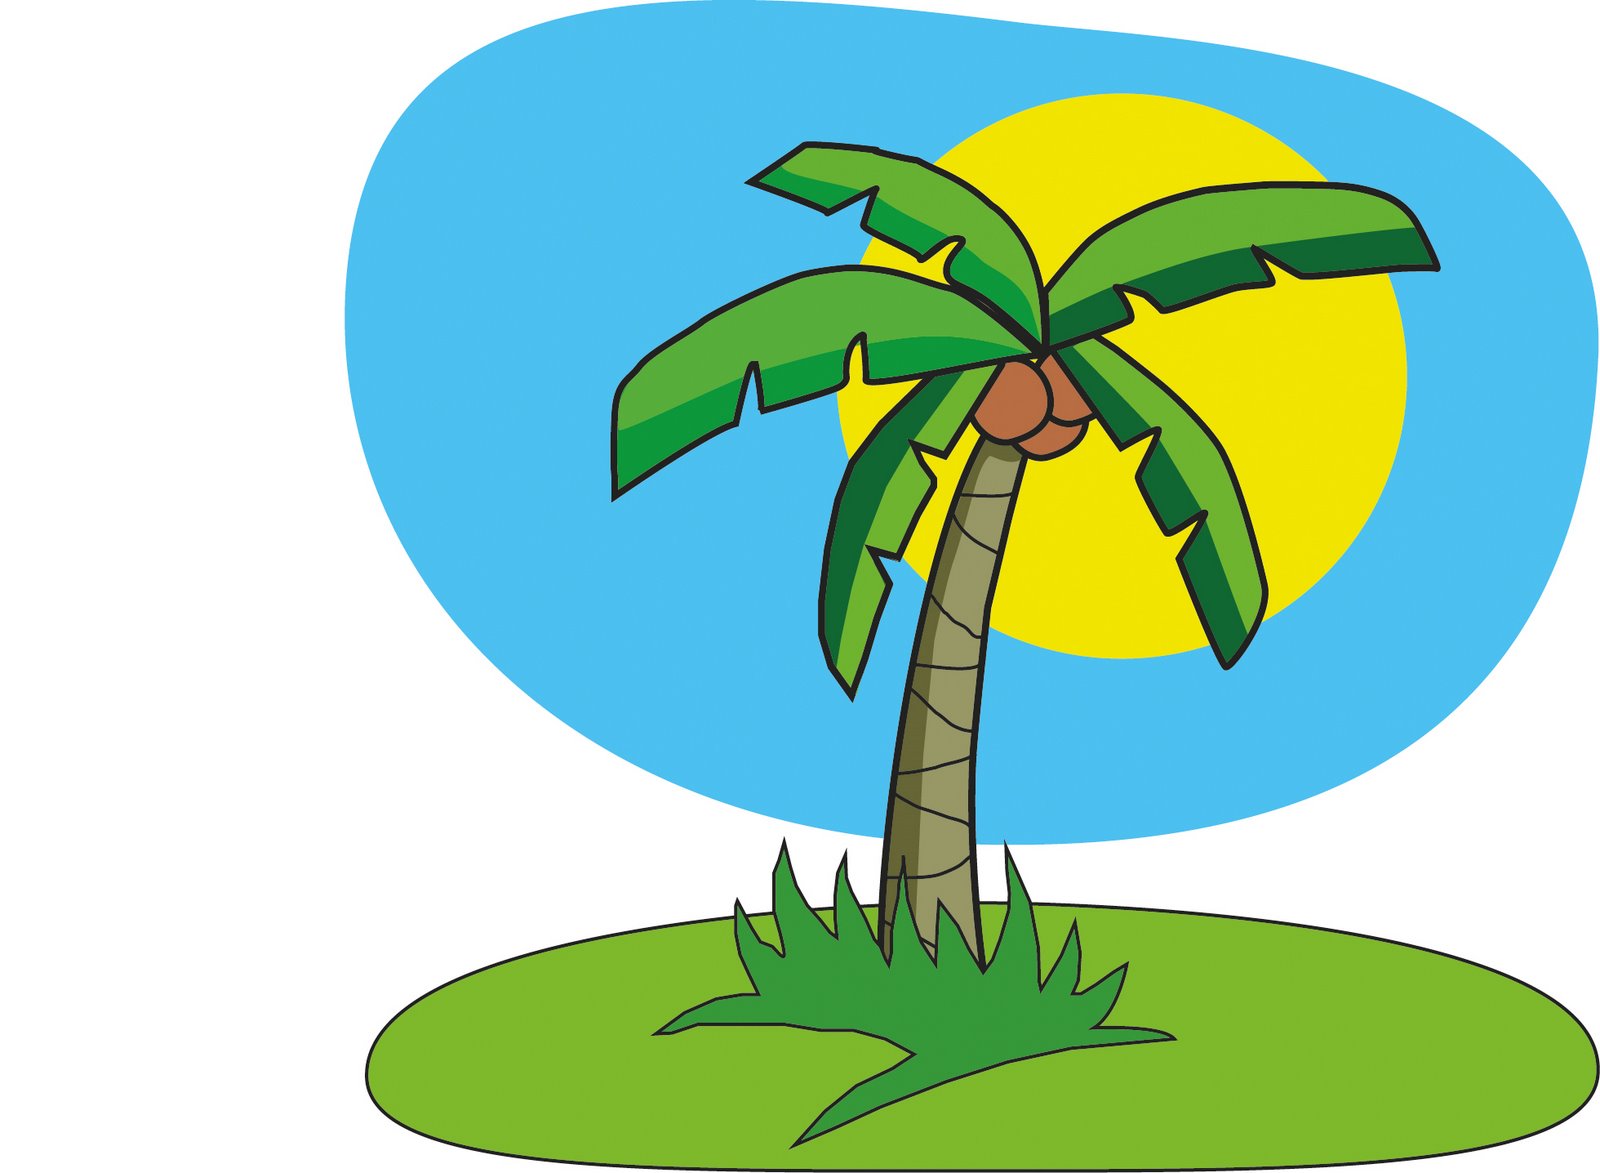 10 Coconut Tree Cartoon   Free Cliparts That You Can Download To You    